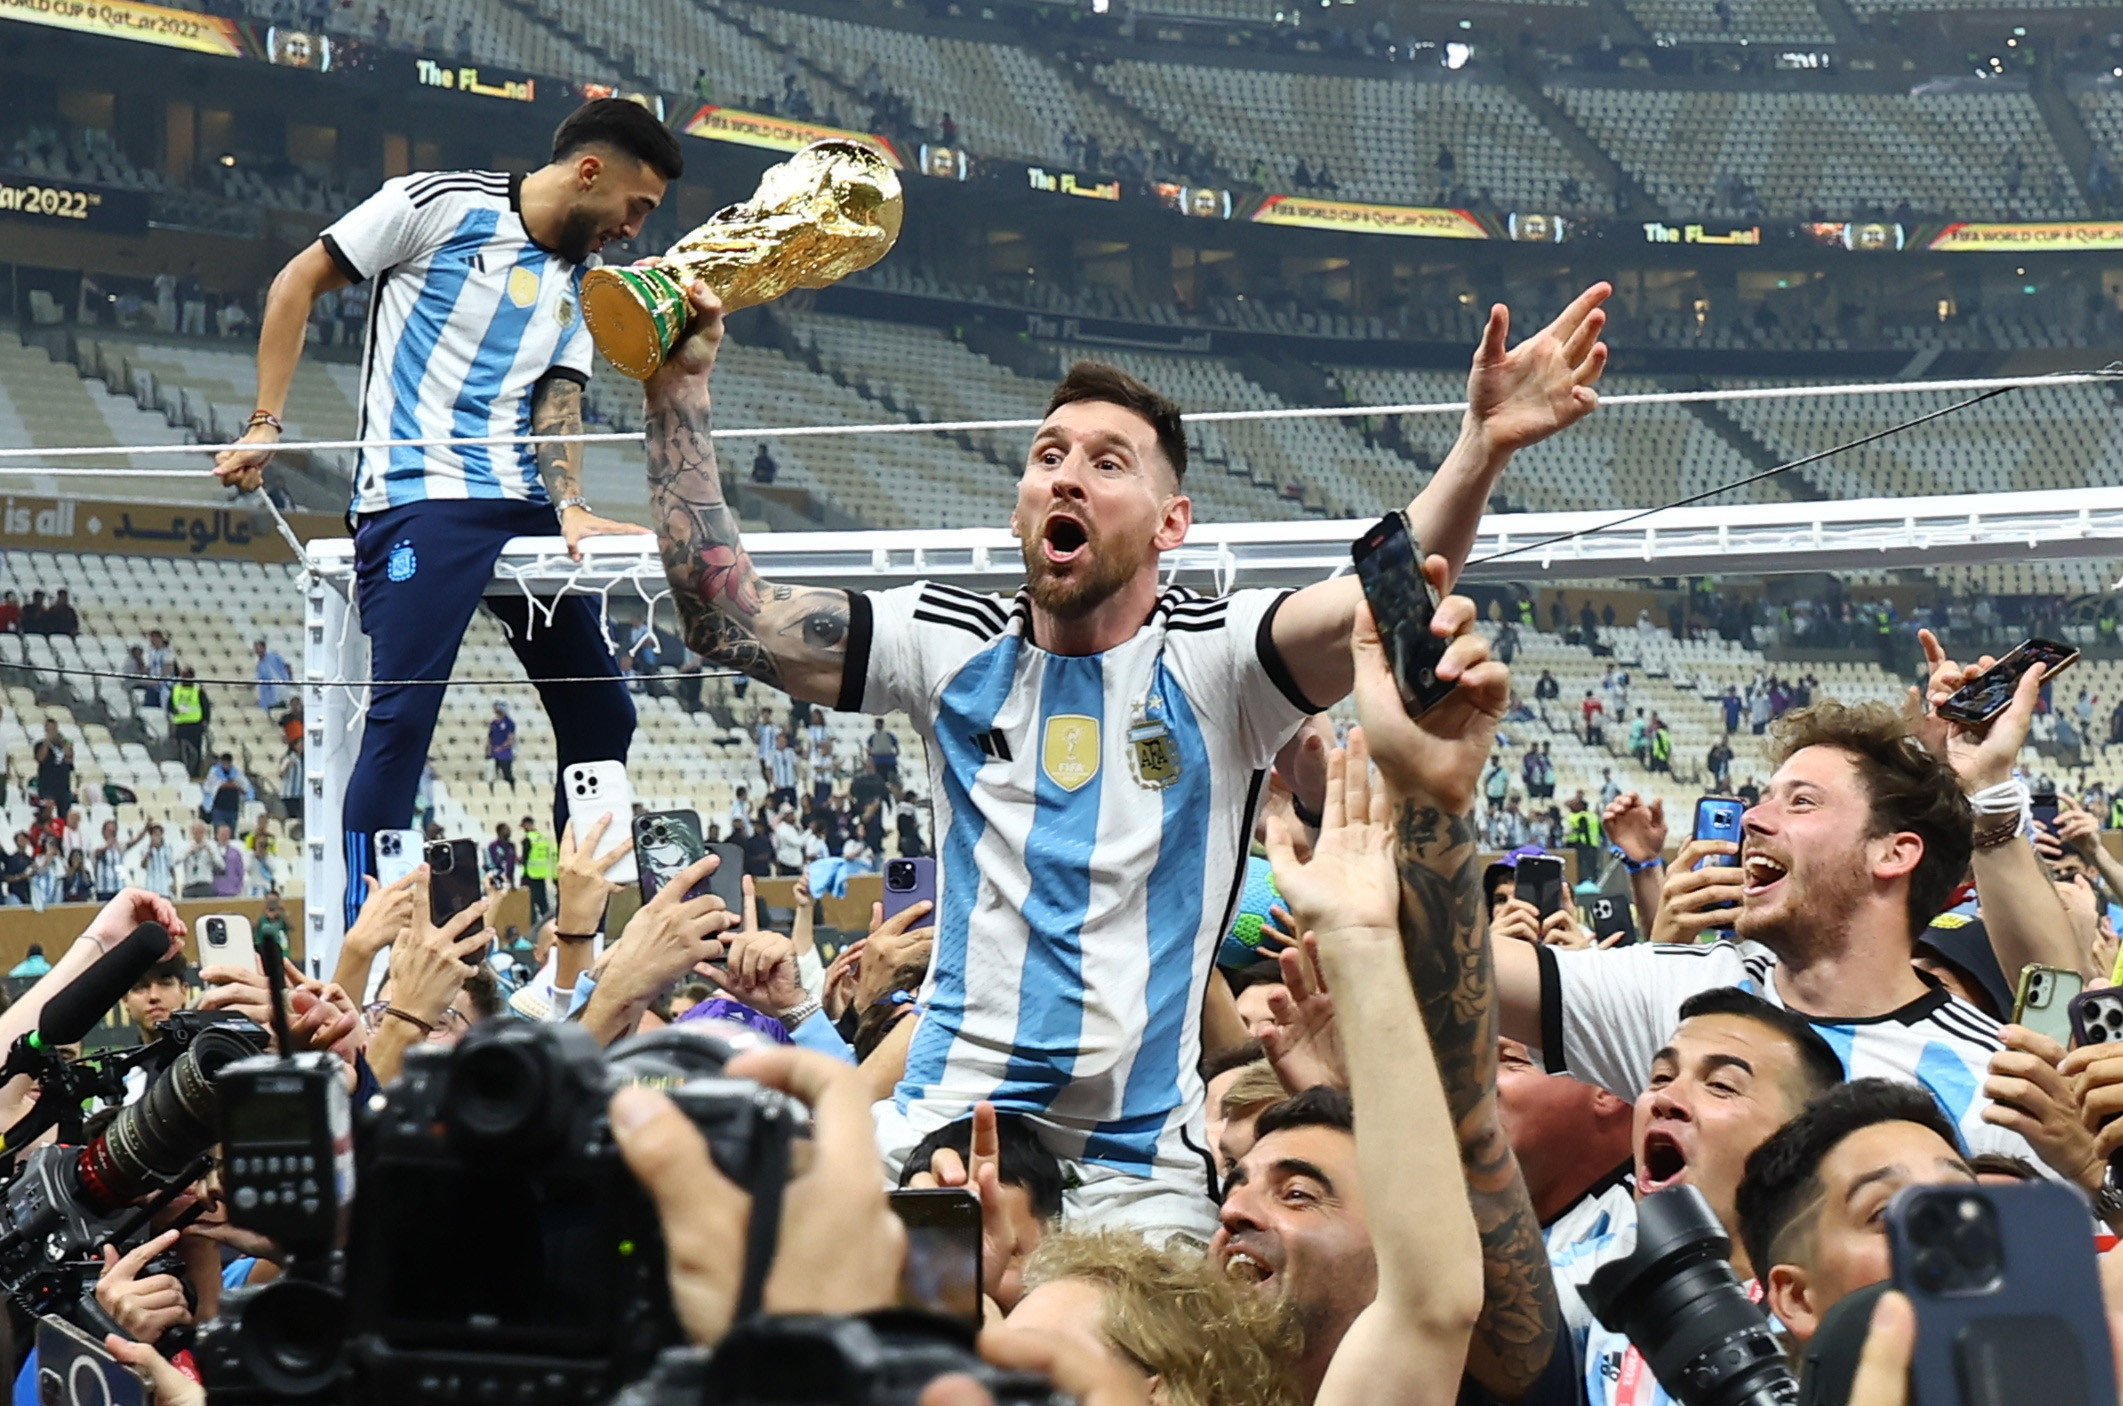 Soccer Football - FIFA World Cup Qatar 2022 - Final - Argentina v France - Lusail Stadium, Lusail, Qatar - December 18, 2022 Argentina's Lionel Messi celebrates with the trophy and fans after winning the World Cup REUTERS/Kai Pfaffenbach